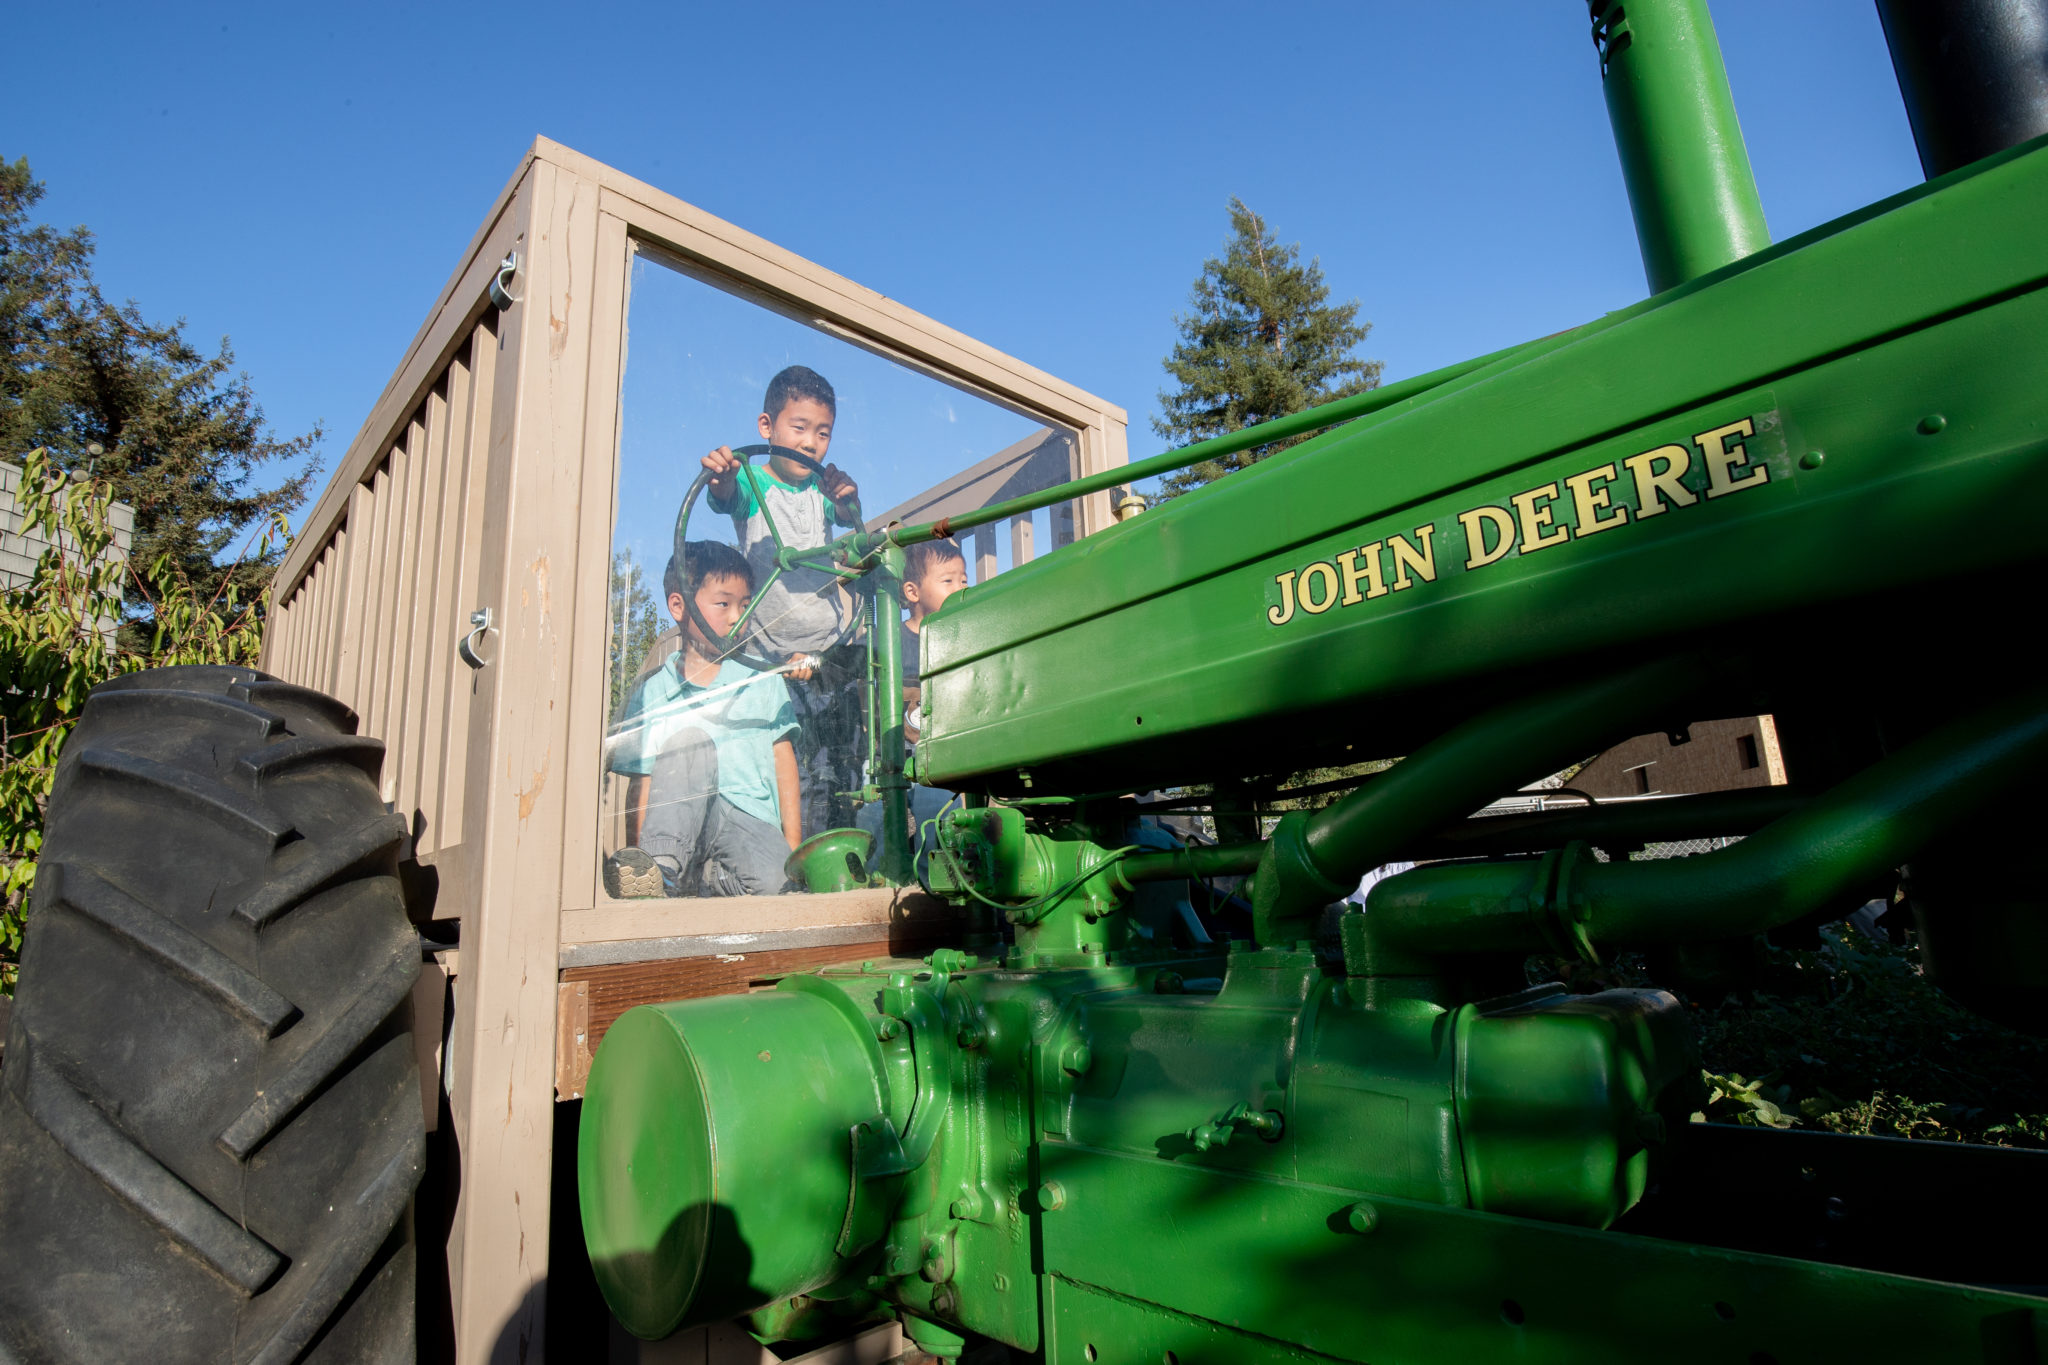 two children safely playing and experiencing hands-on a real tractor